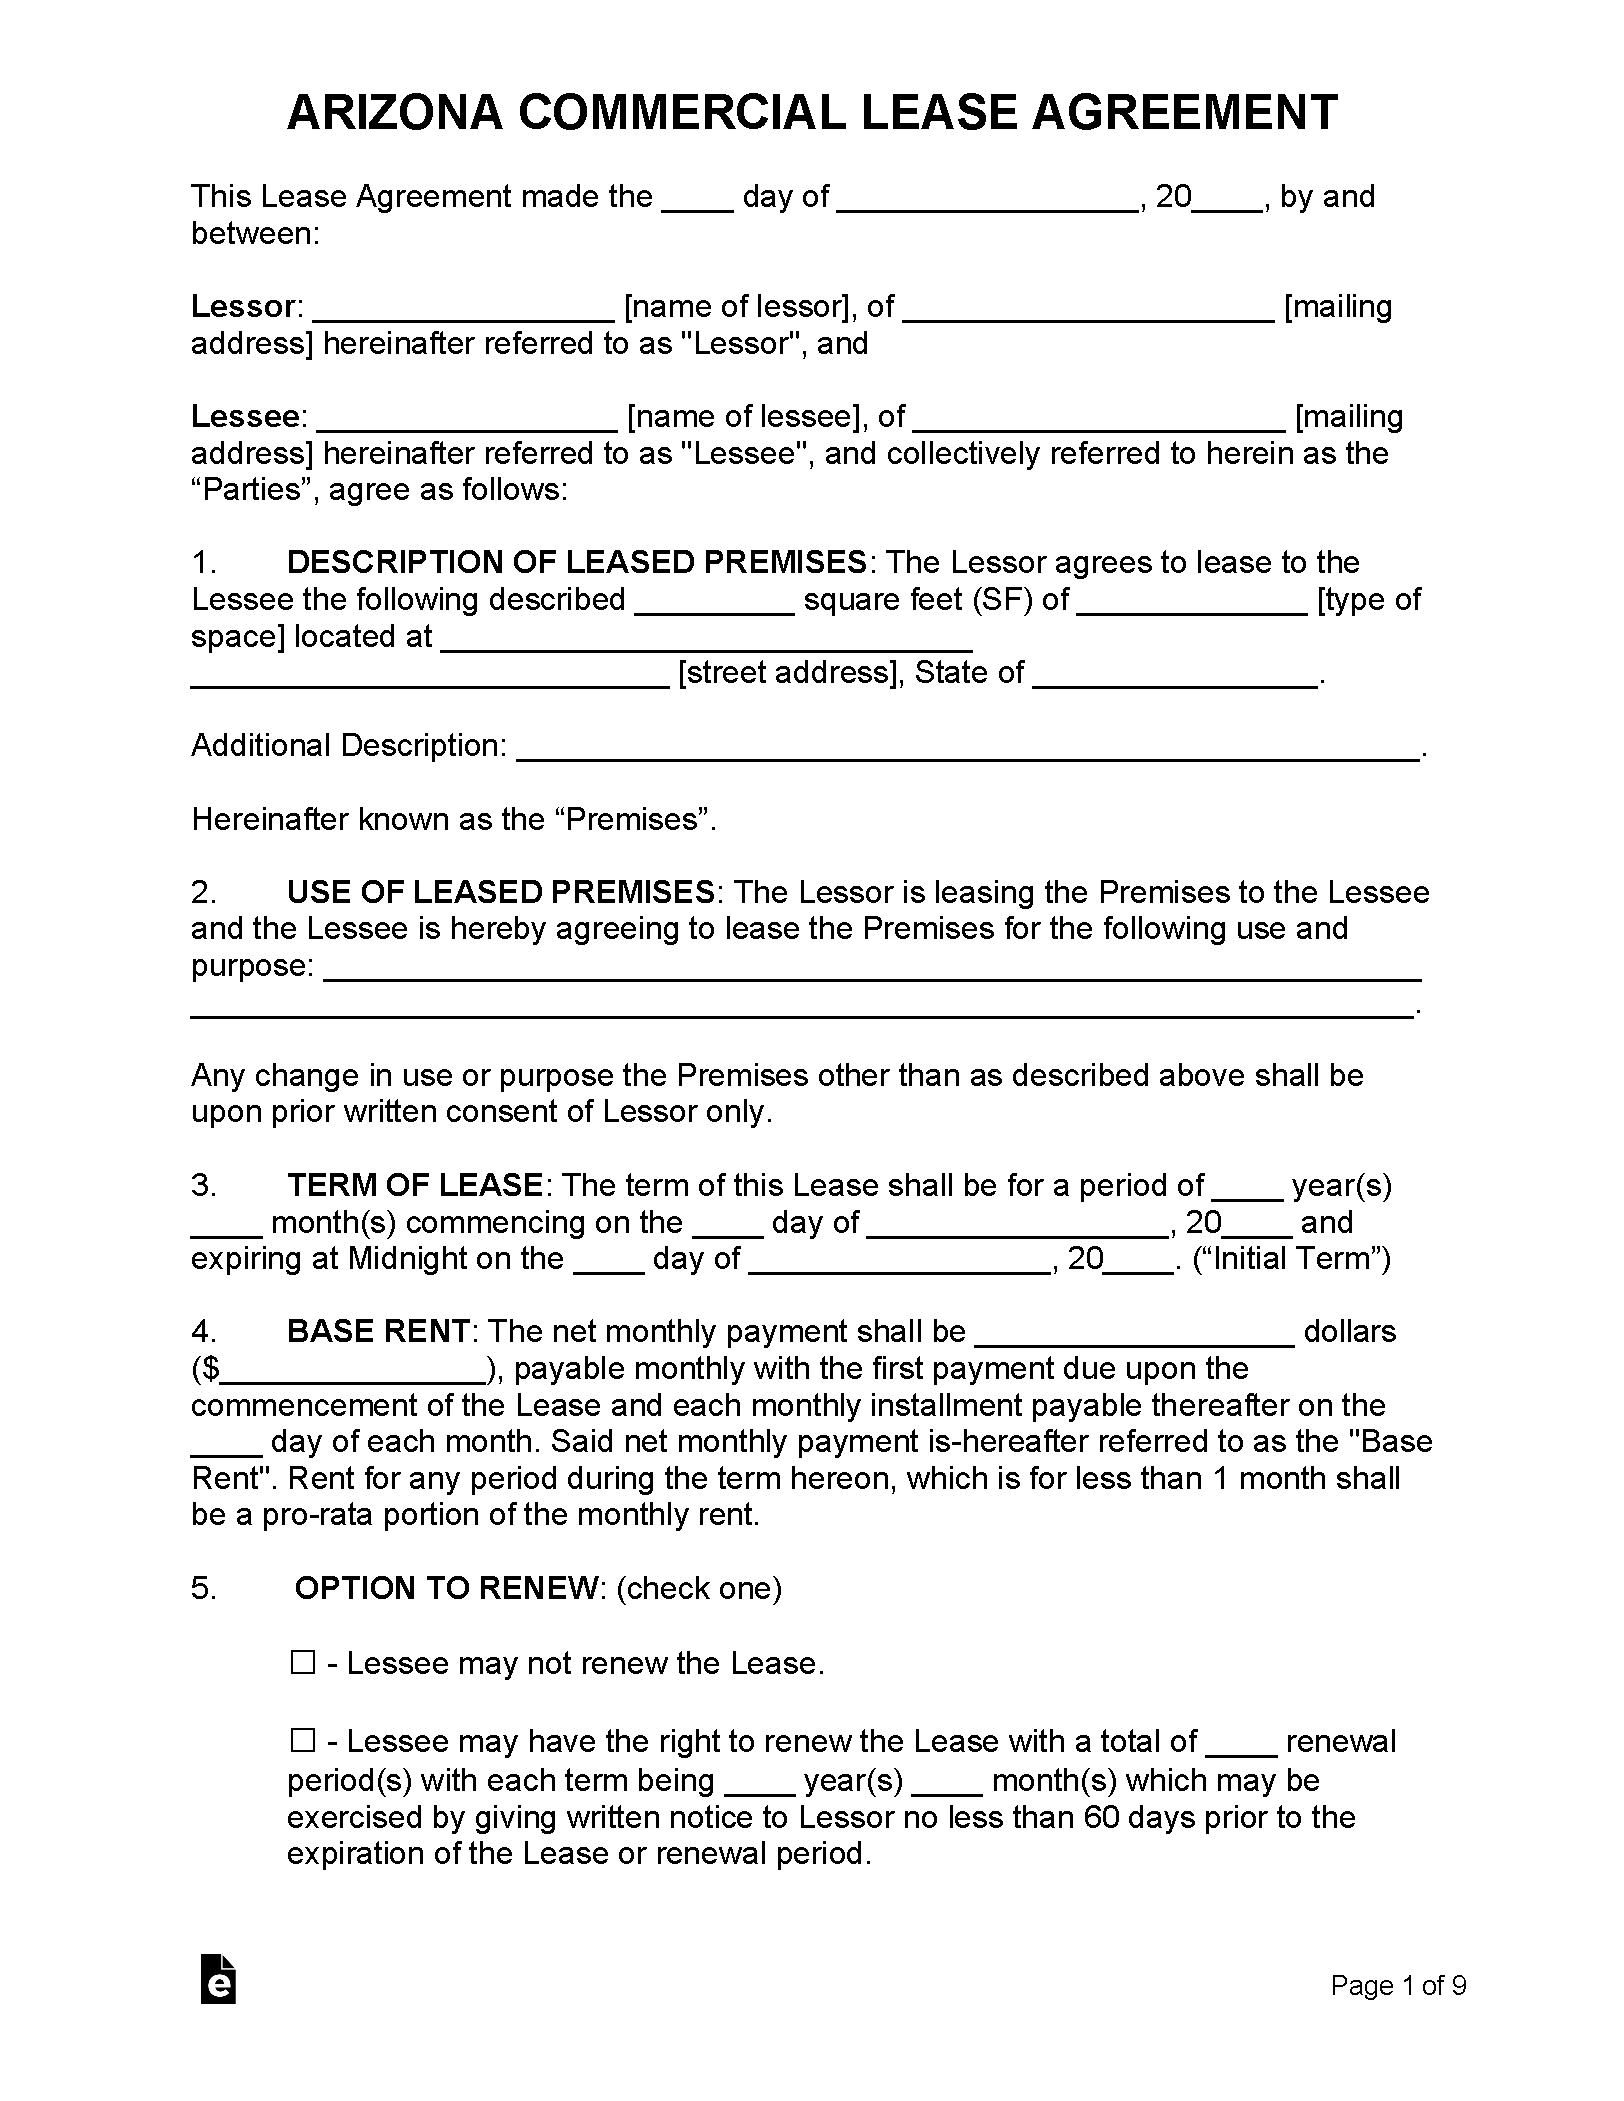 lease agreement template word free download